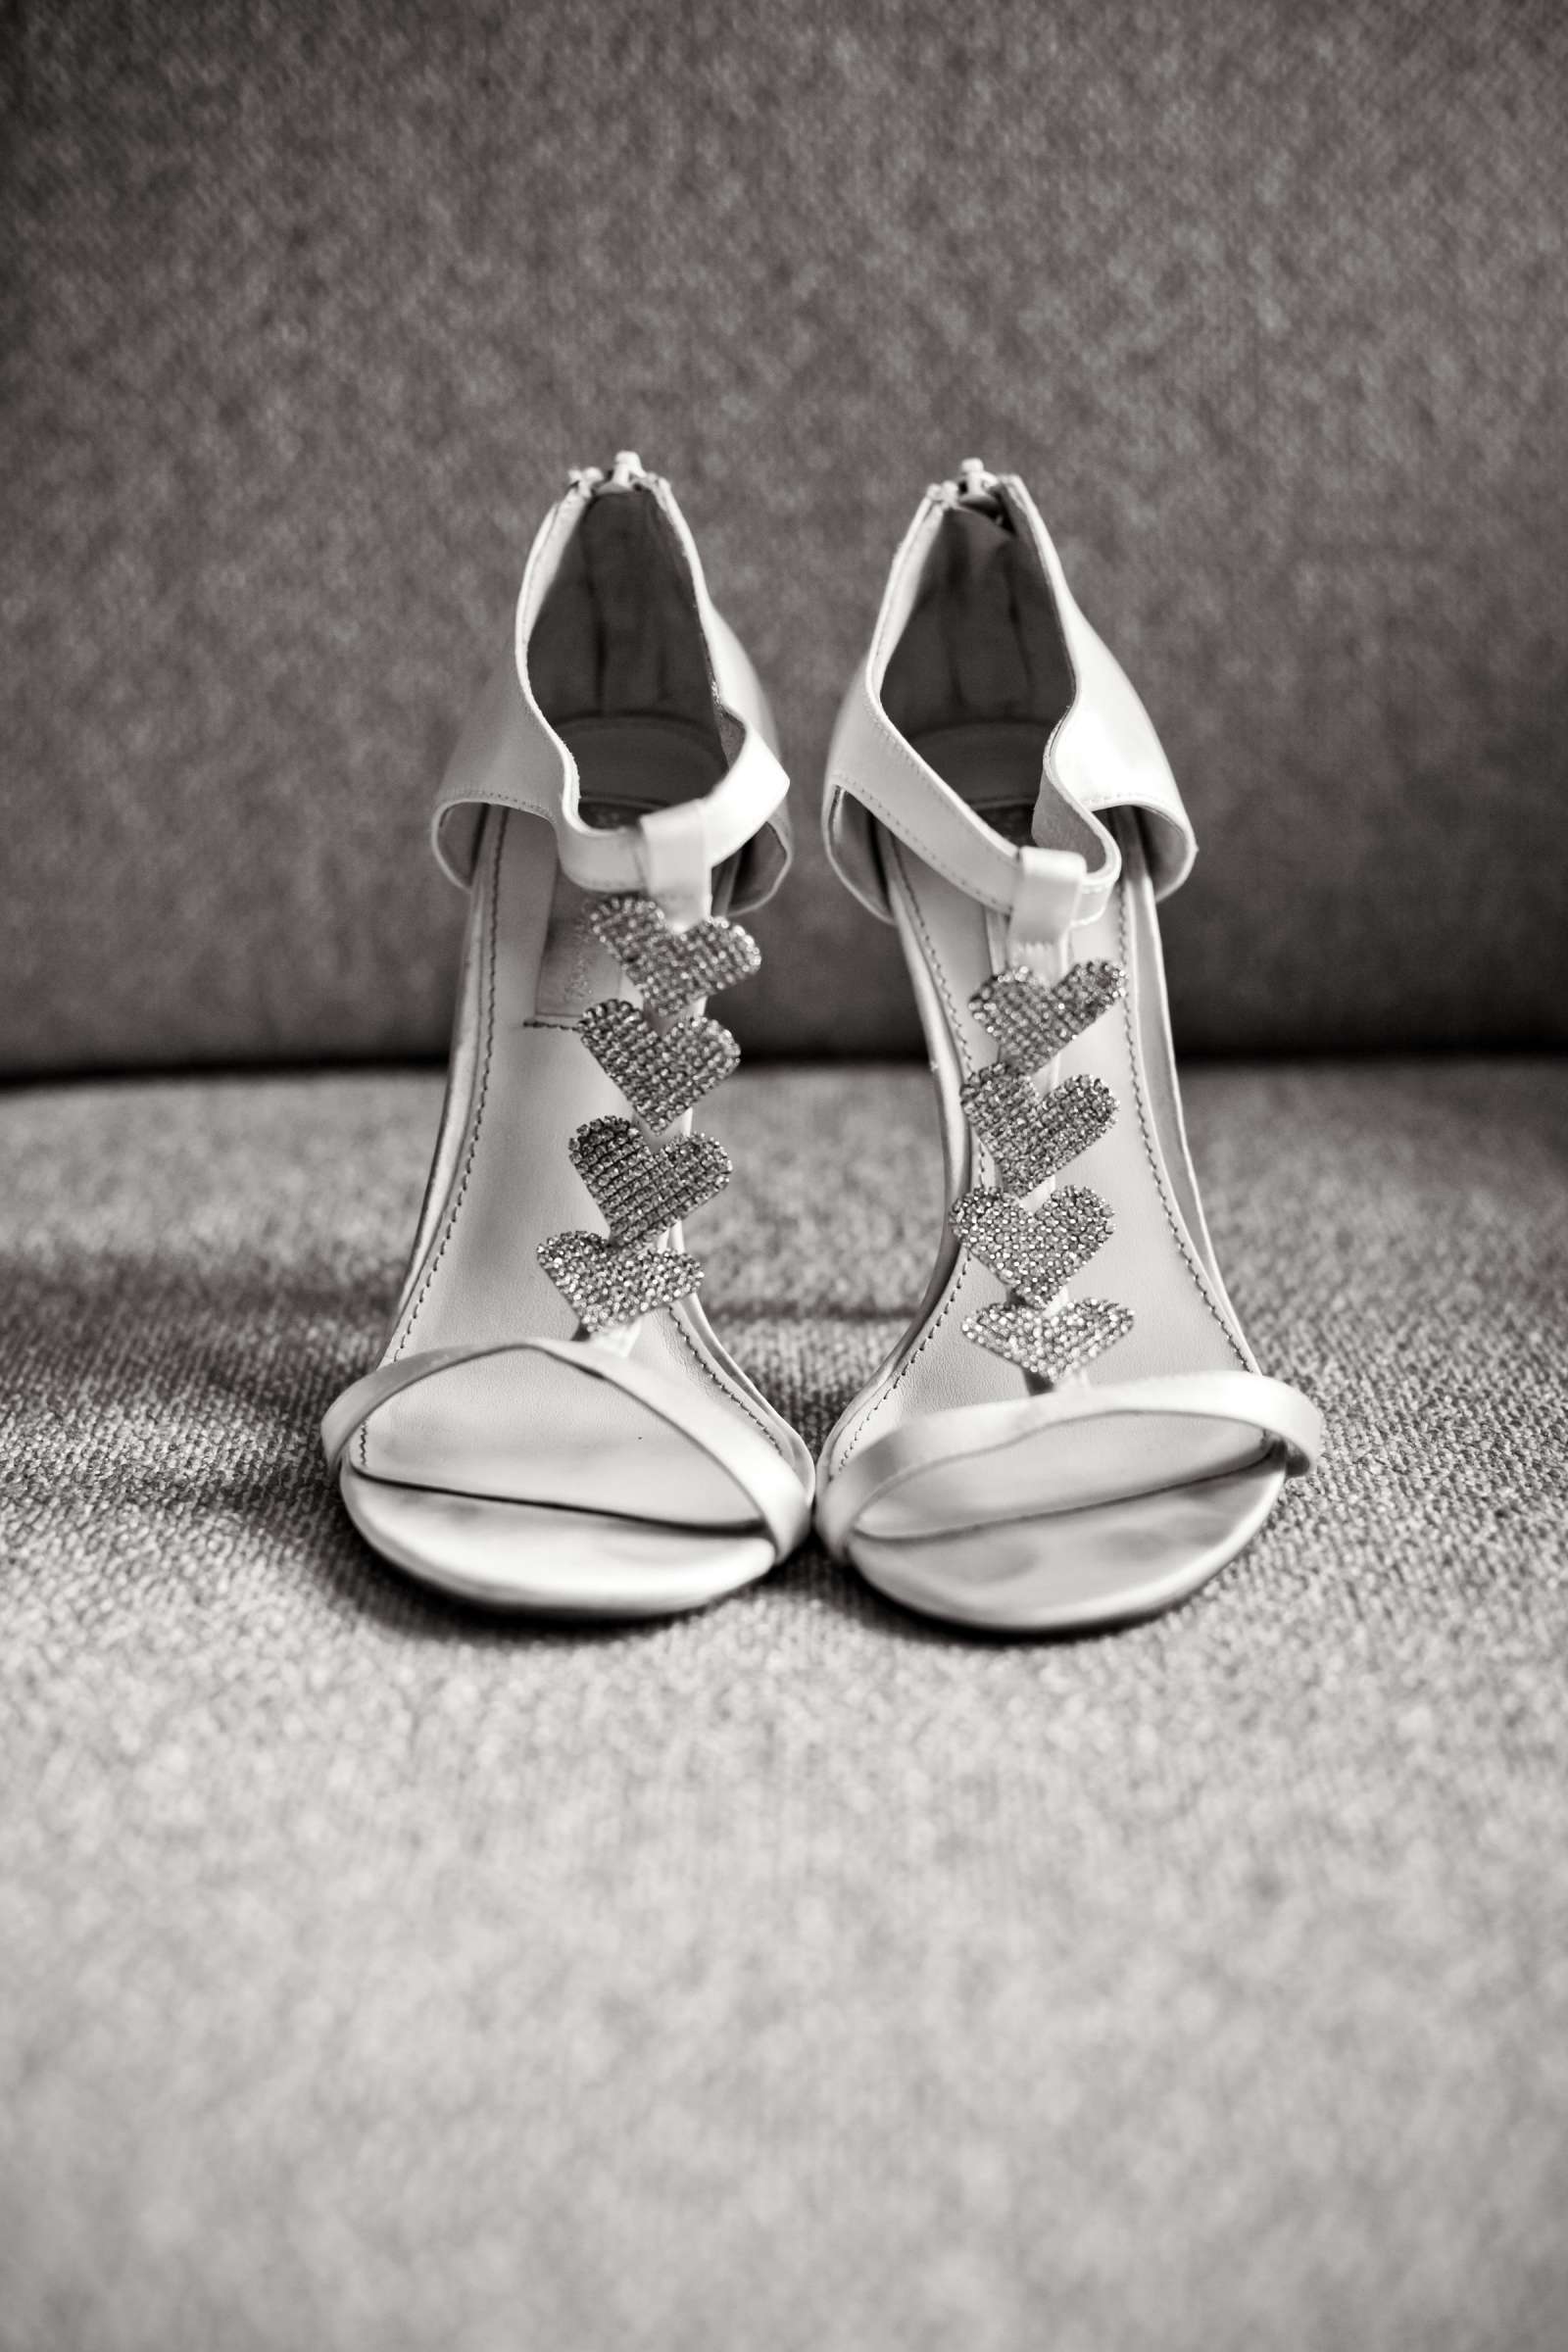 Shoes at The Ultimate Skybox Wedding, Dani and Andy Wedding Photo #21 by True Photography